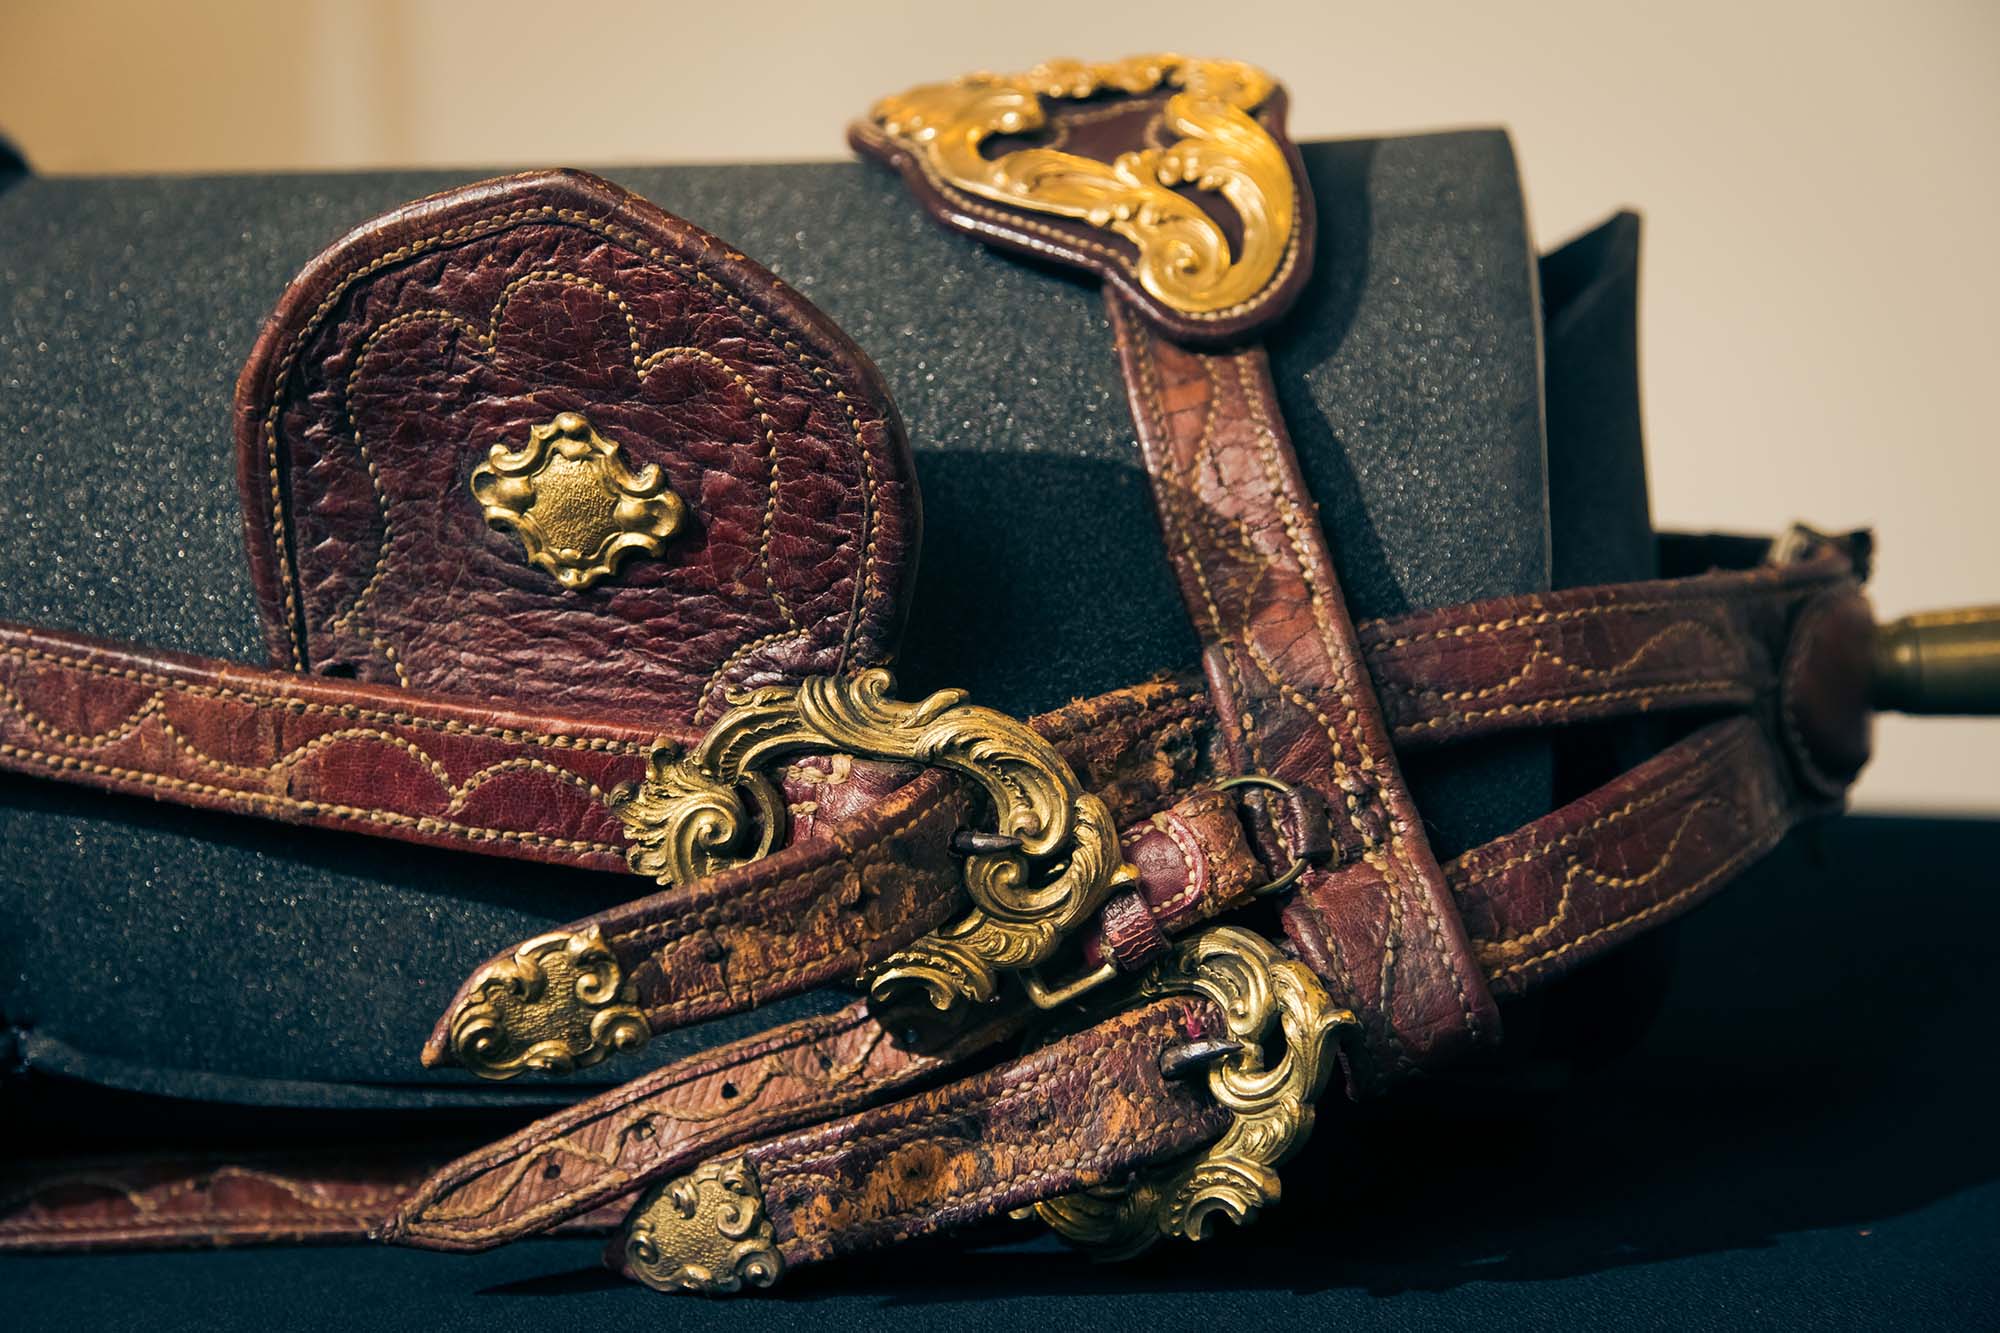 a historic piece of equestrian leather